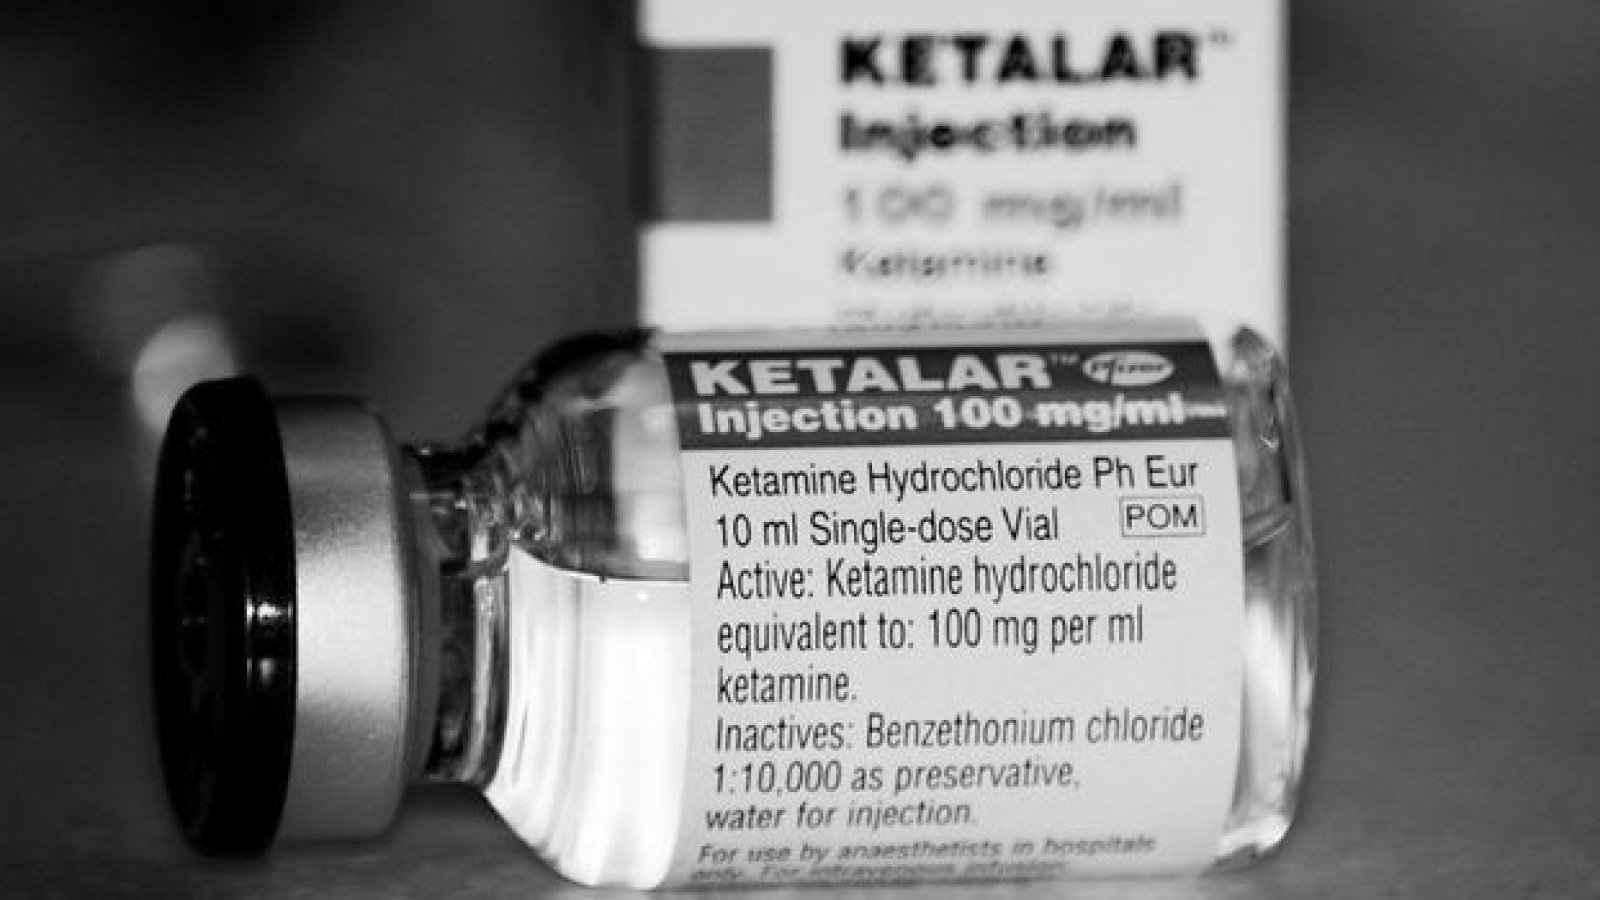  From Anesthesia to Therapeutic Tool: The Evolution of Ketalar in Medicine